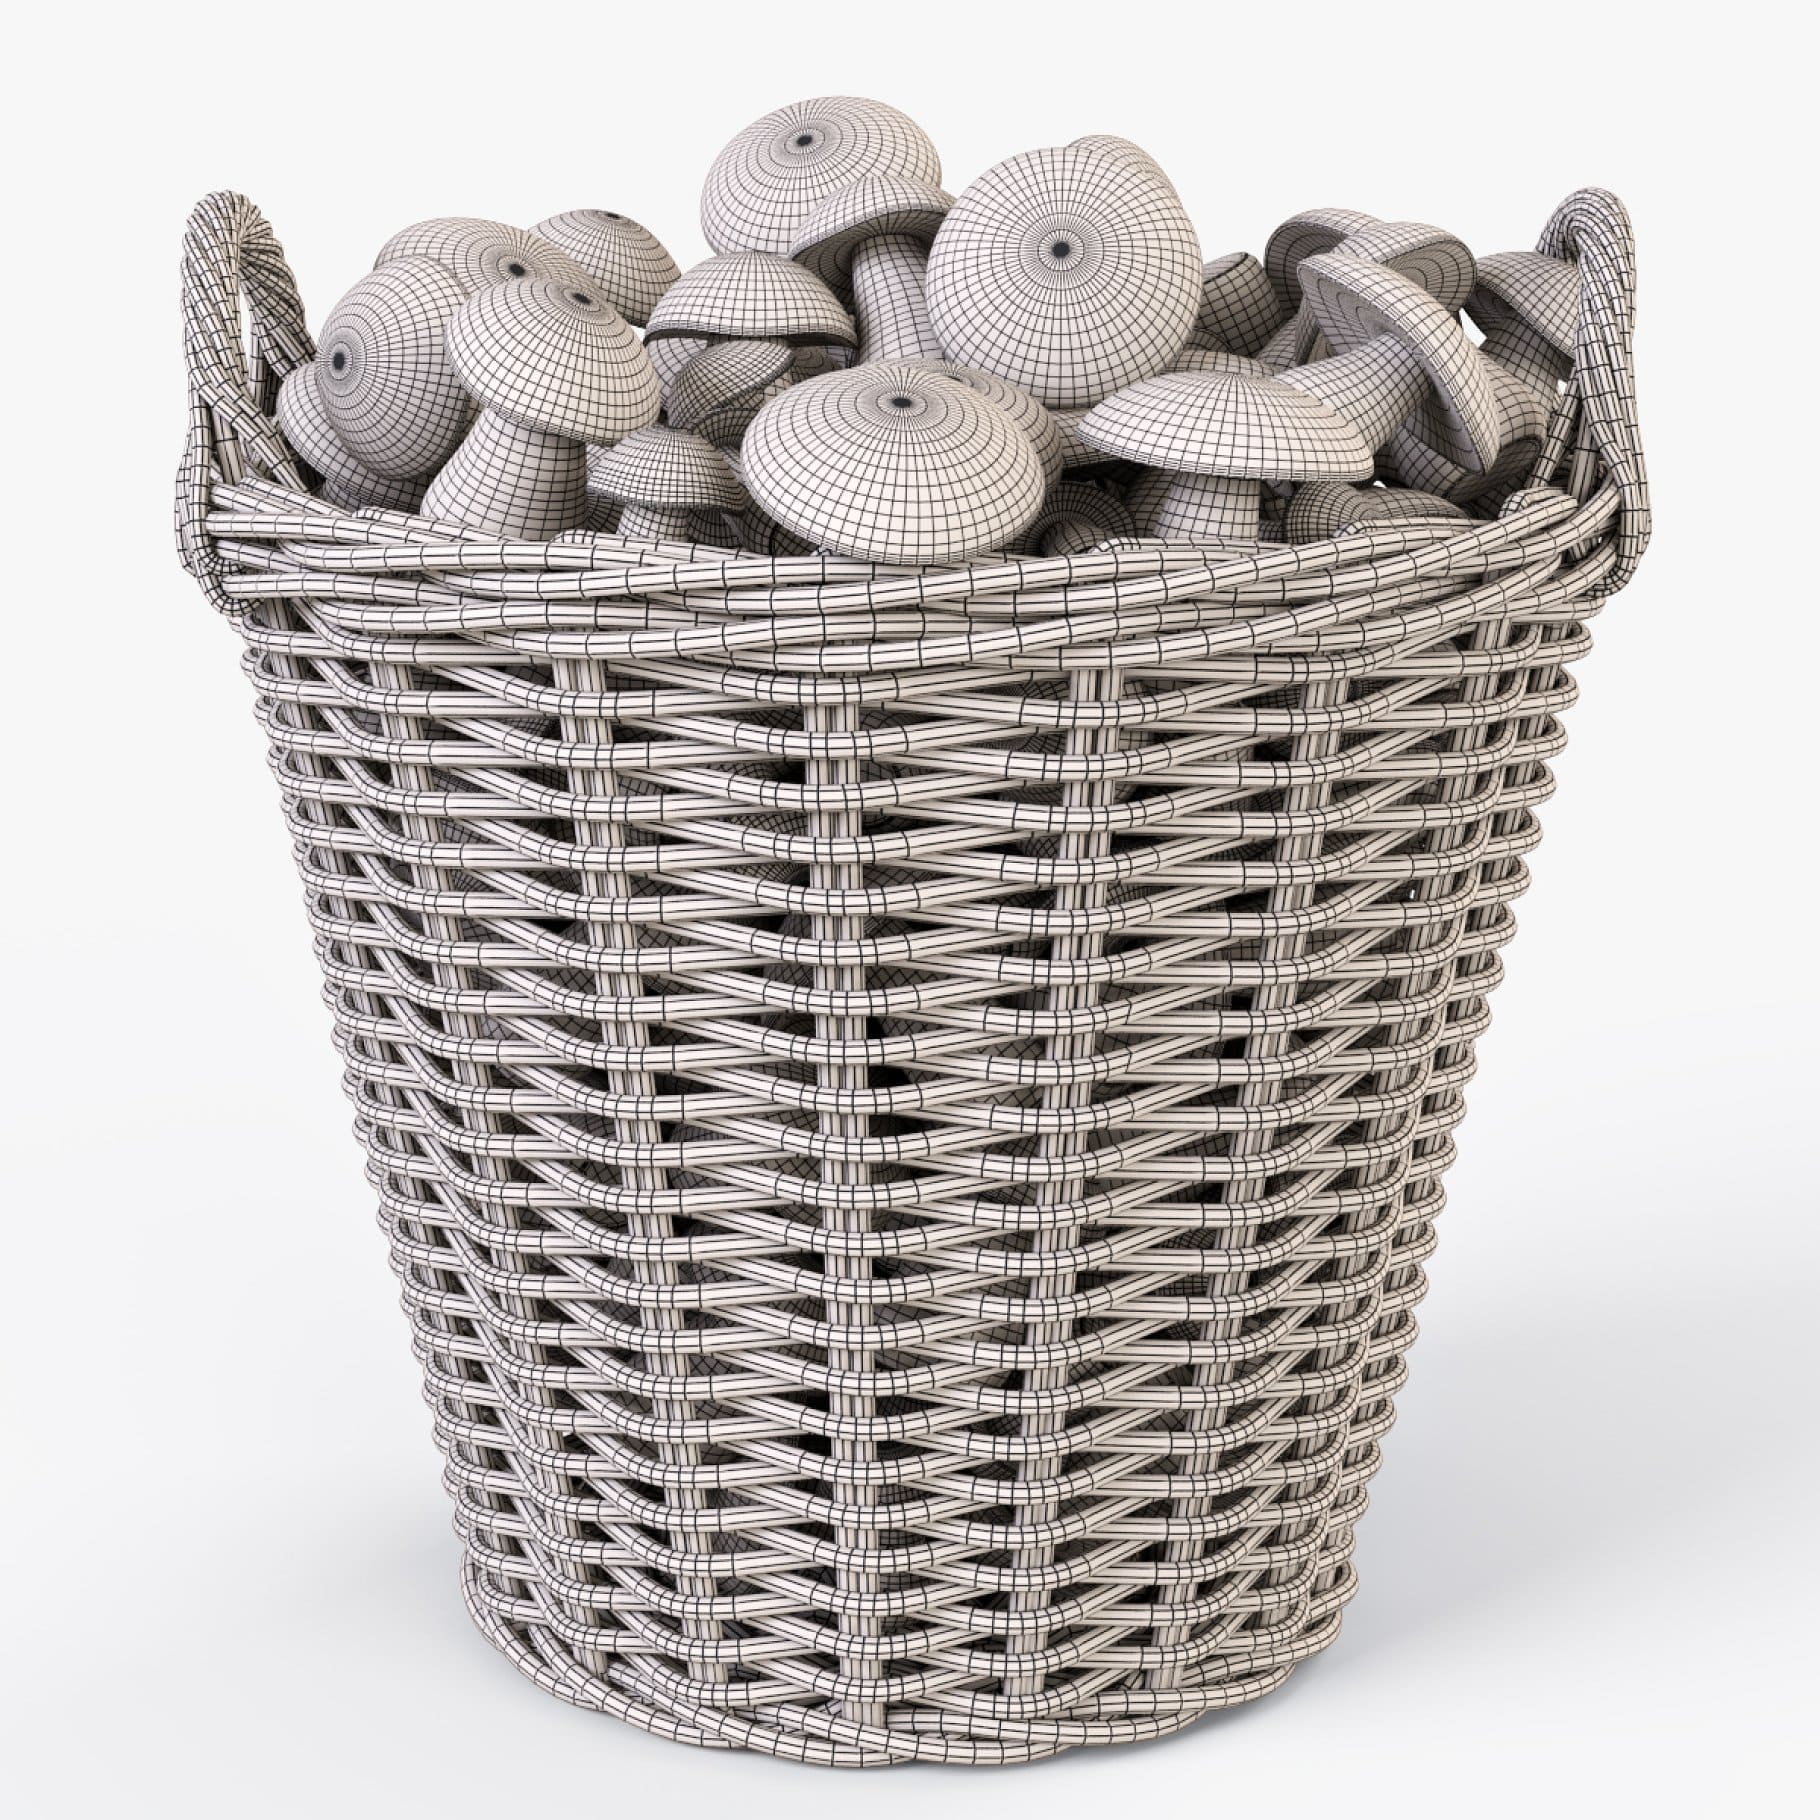 A basket with mushrooms is drawn on a white background.